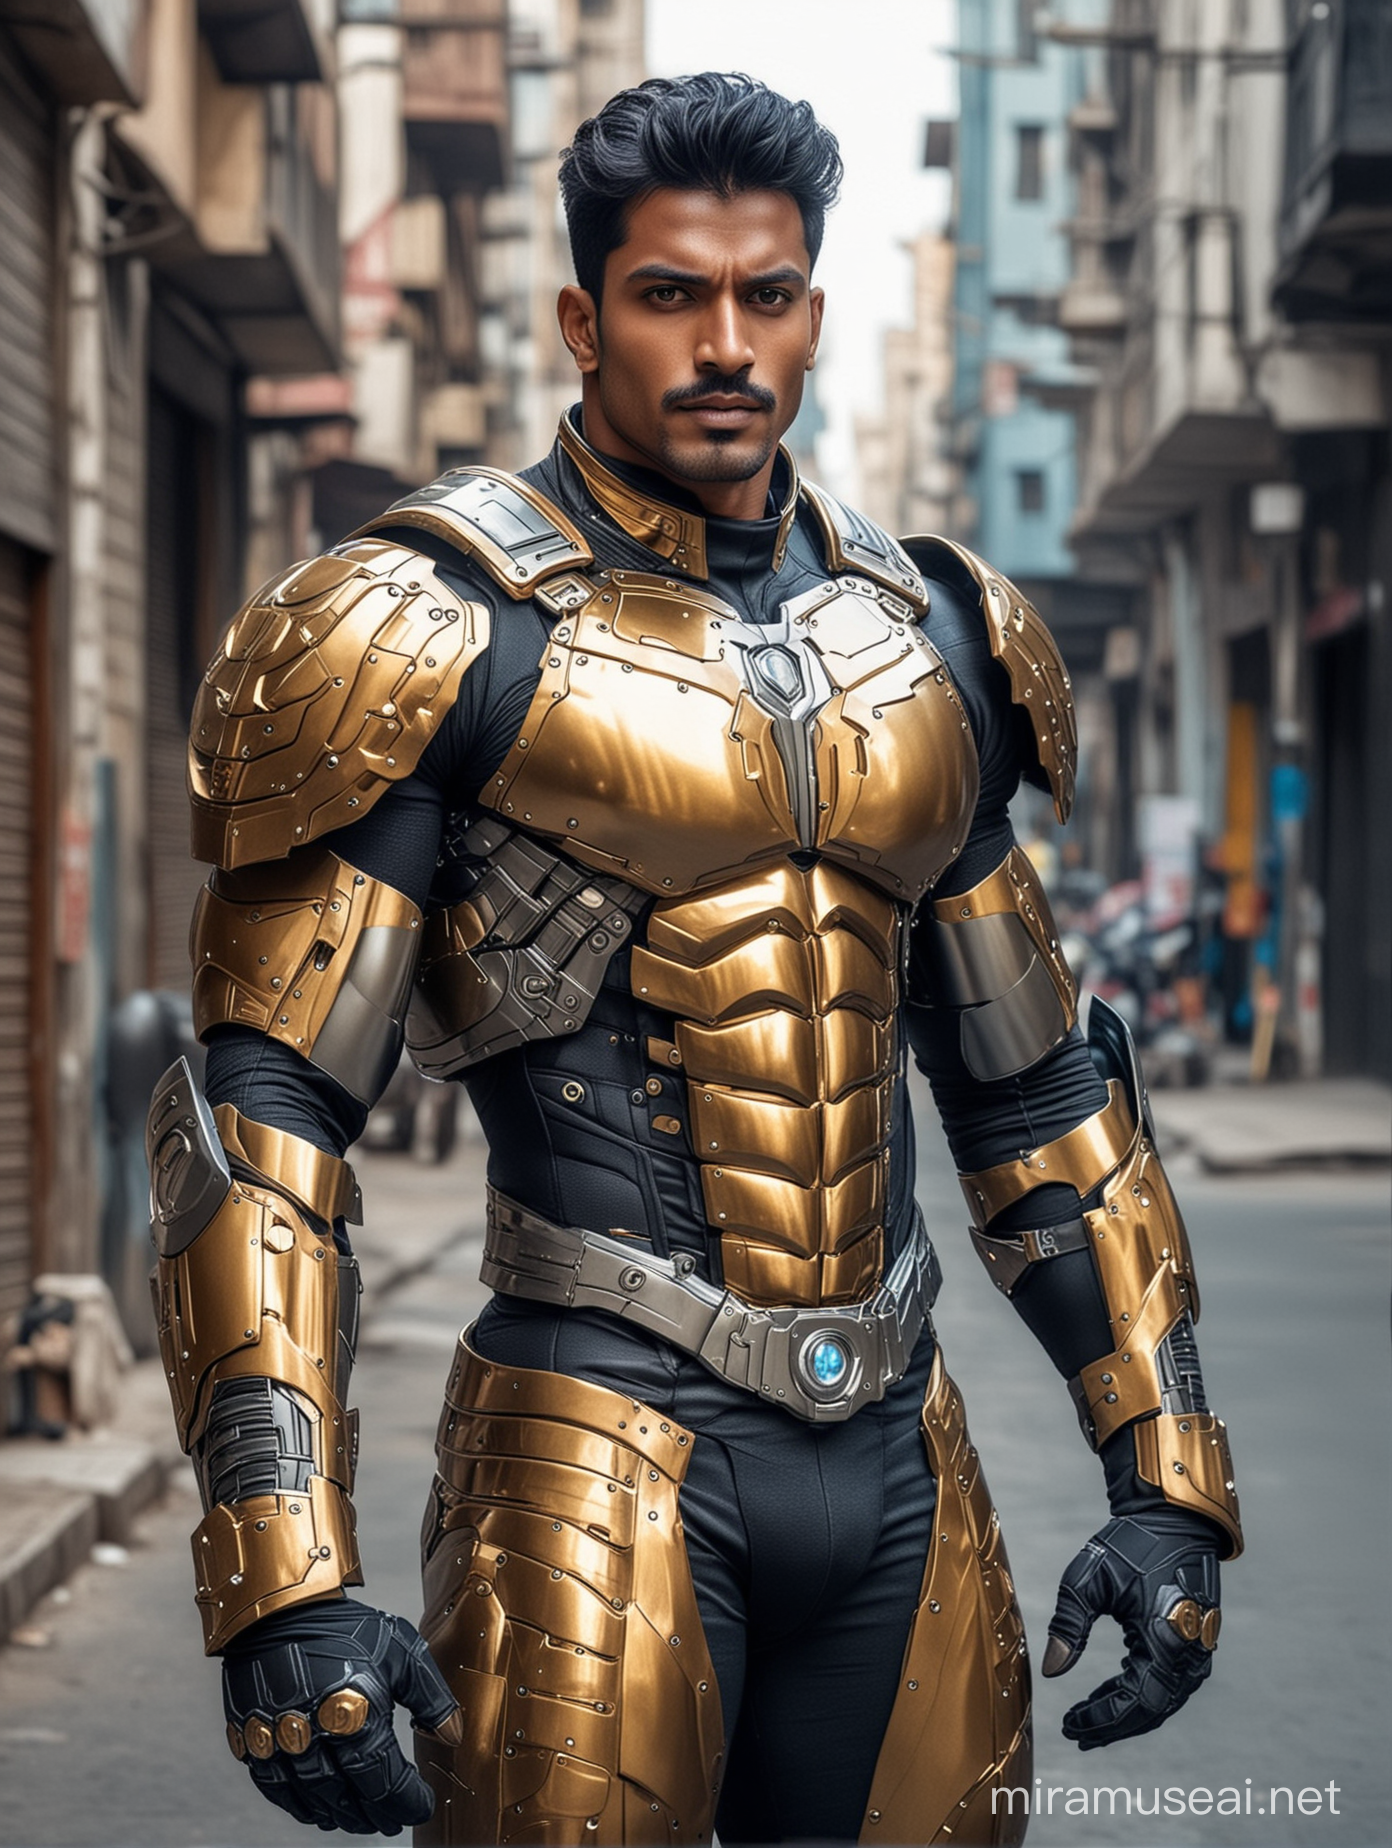 Tall and handsome bodybuilder Indian men with beautiful hairstyle with attractive eyes and Big wide shoulder and chest in sci-fi High Tech golden, sliver, light blue and black armour suit with firearms standing on street